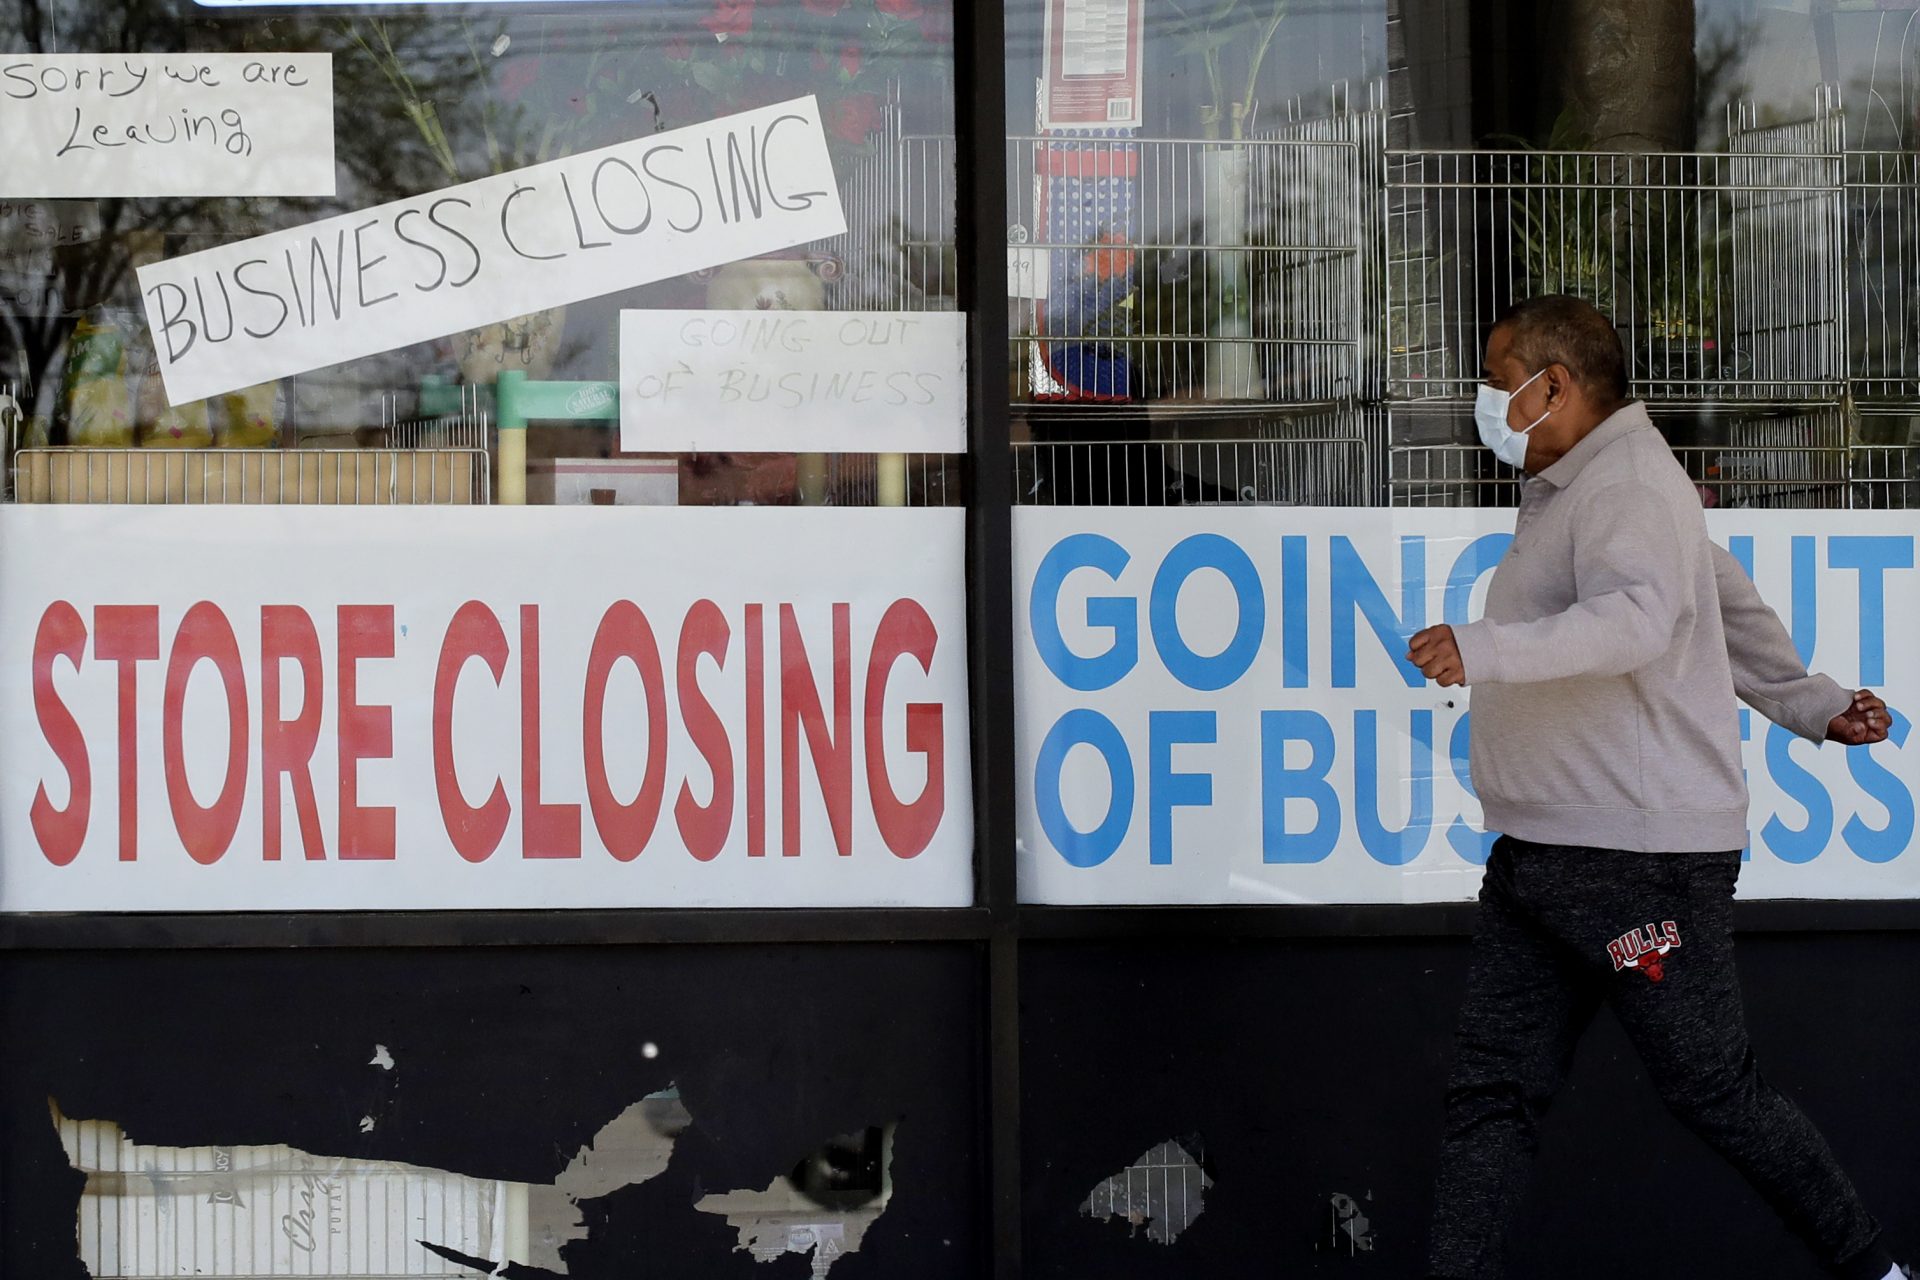 FILE - In this May 21, 2020 file photo, a man looks at signs of a closed store due to COVID-19 in Niles, Ill. U.S. businesses shed 2.76 million jobs in May, as the economic damage from the historically unrivaled coronavirus outbreak stretched into a third month. The payroll company ADP reported Wednesday that businesses have let go of a combined 22.6 million jobs since March.